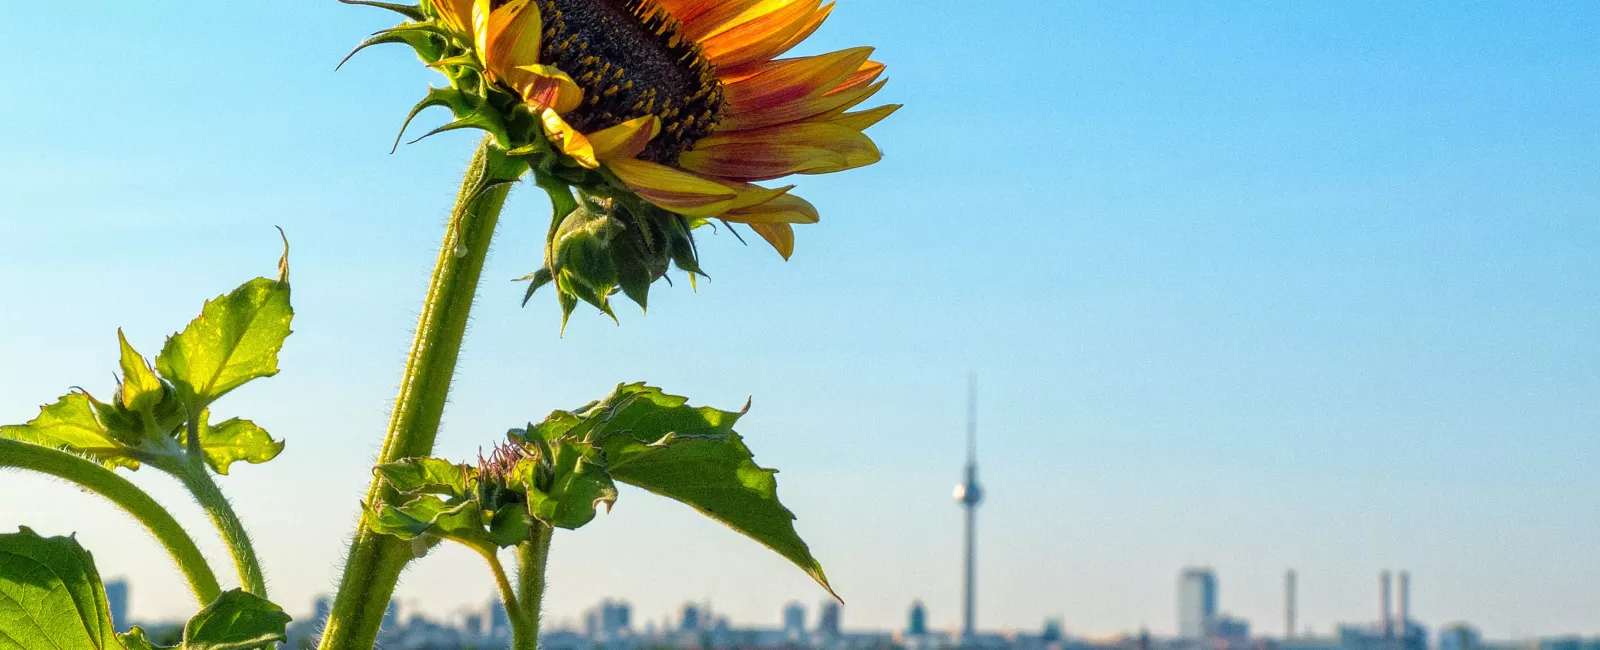 Sunflower plant with cityscape in background